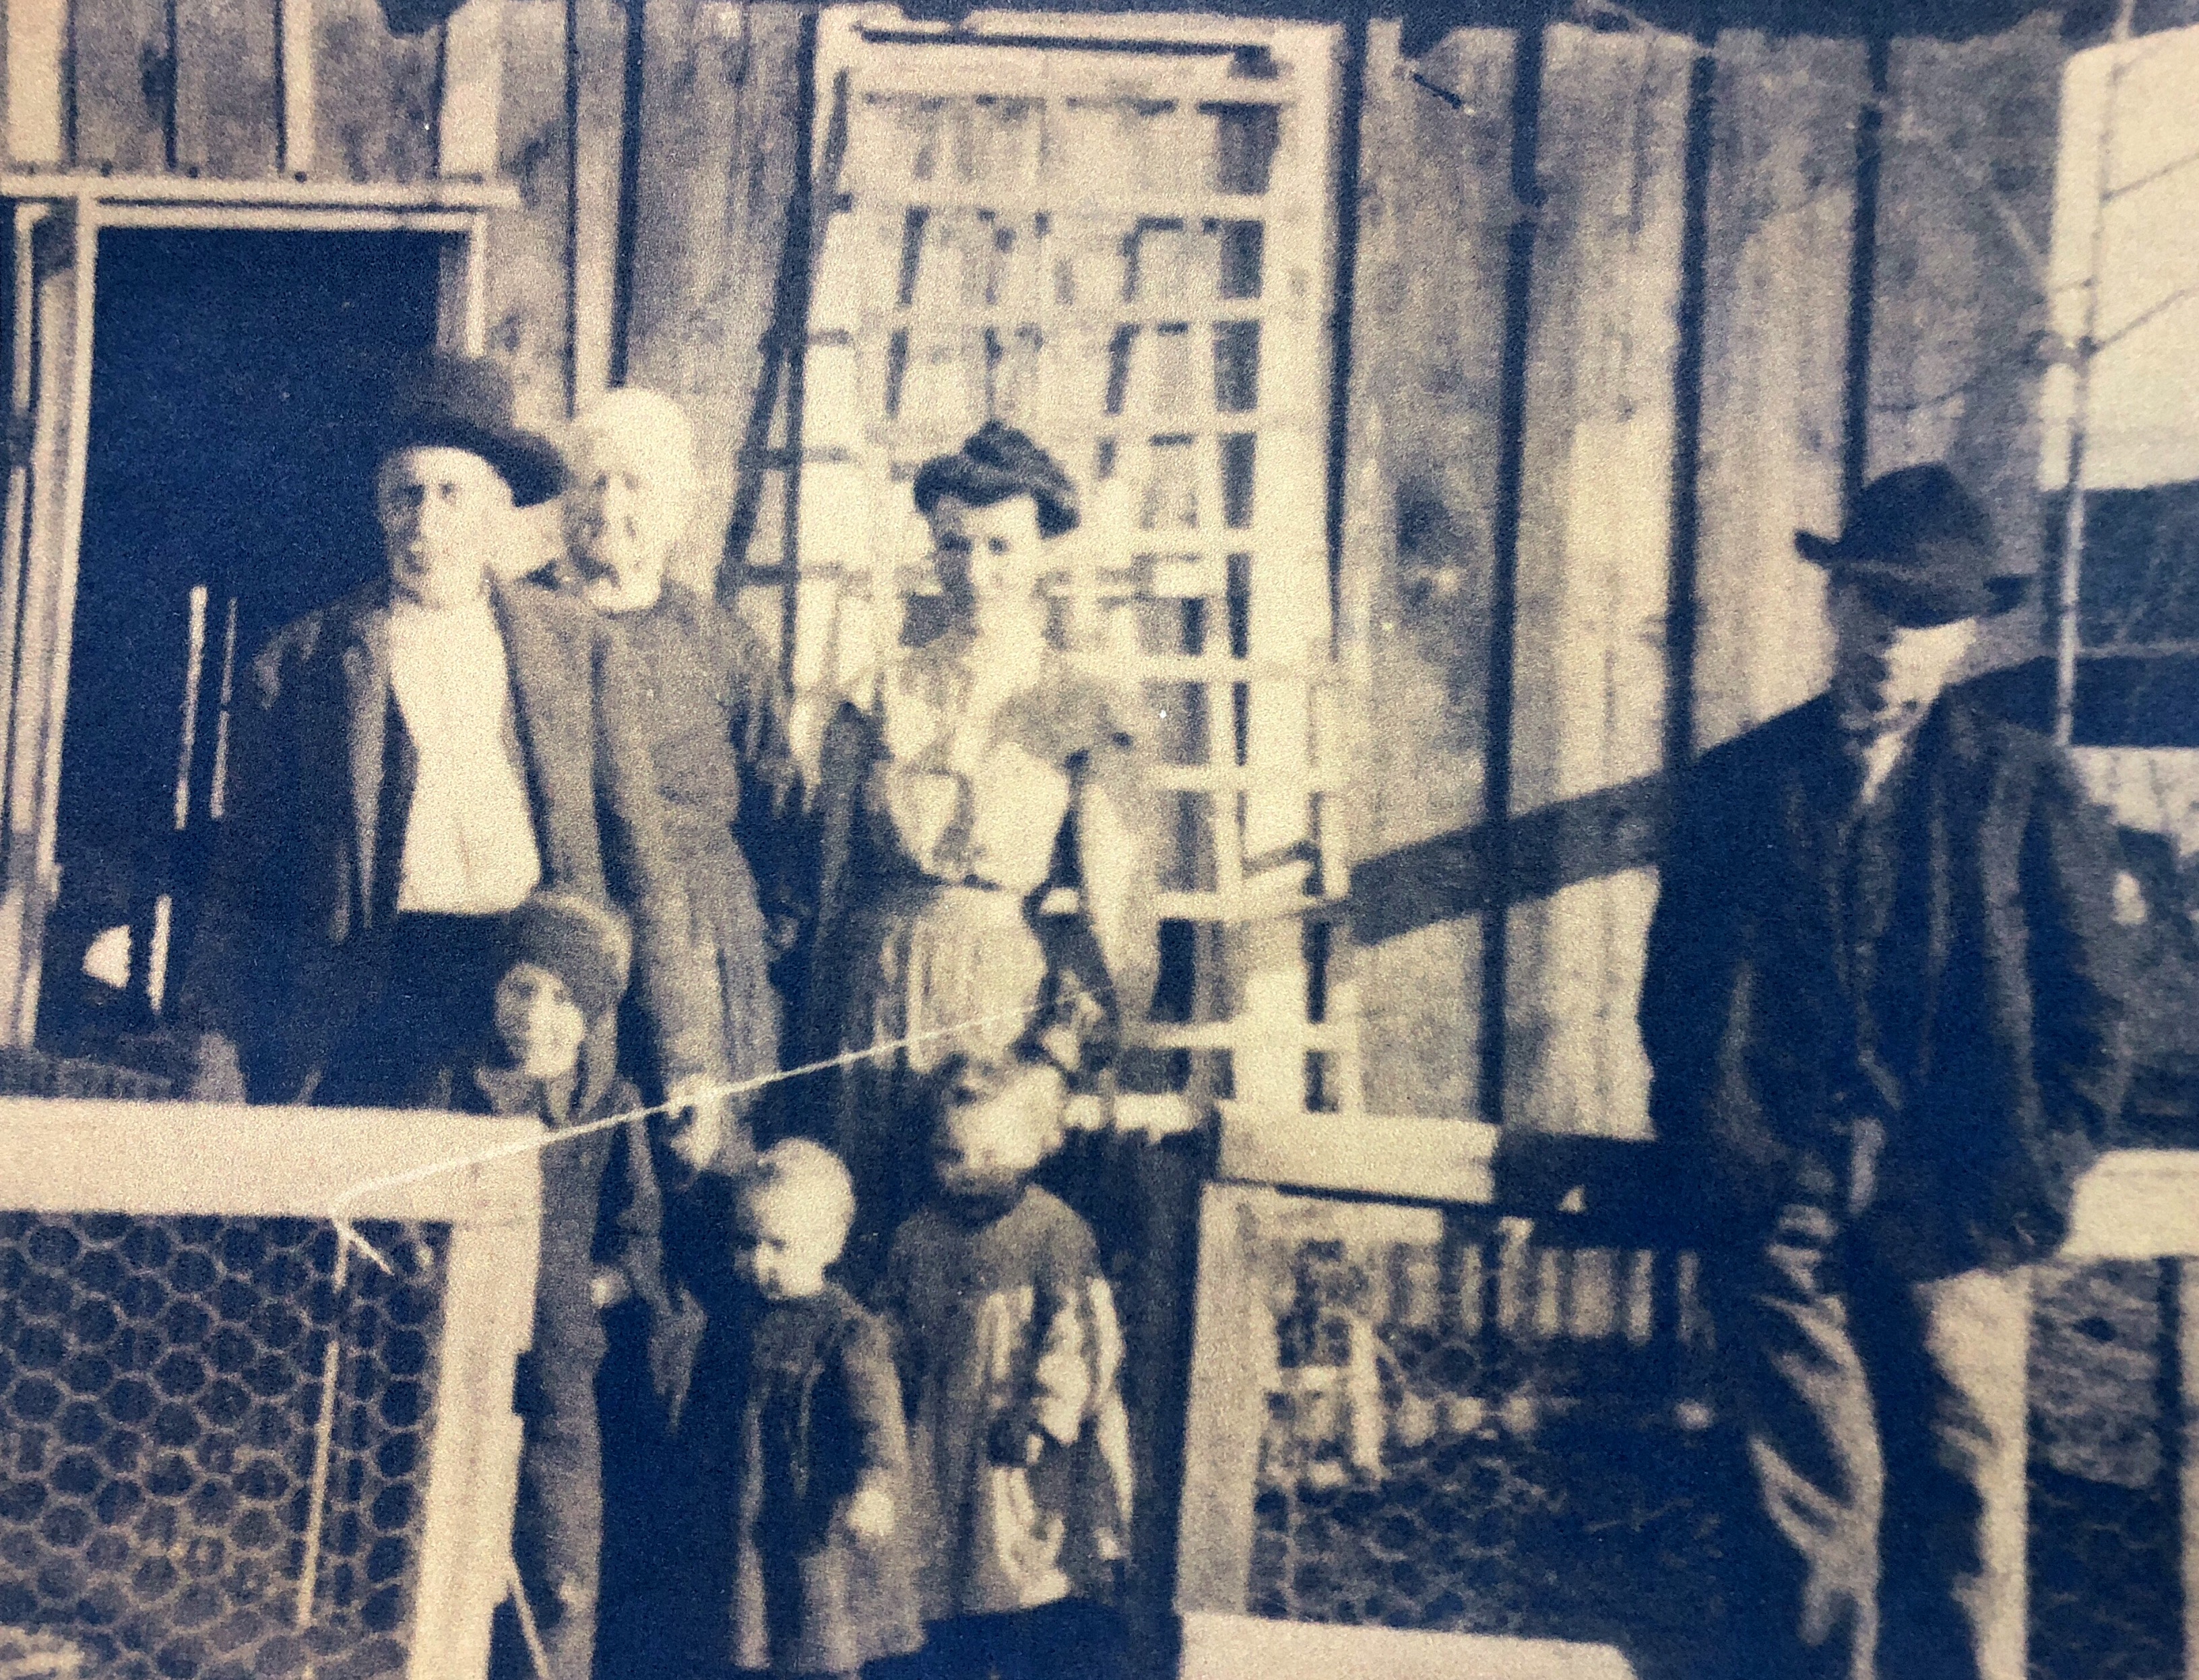 Grandpa Grigsby and family 1908